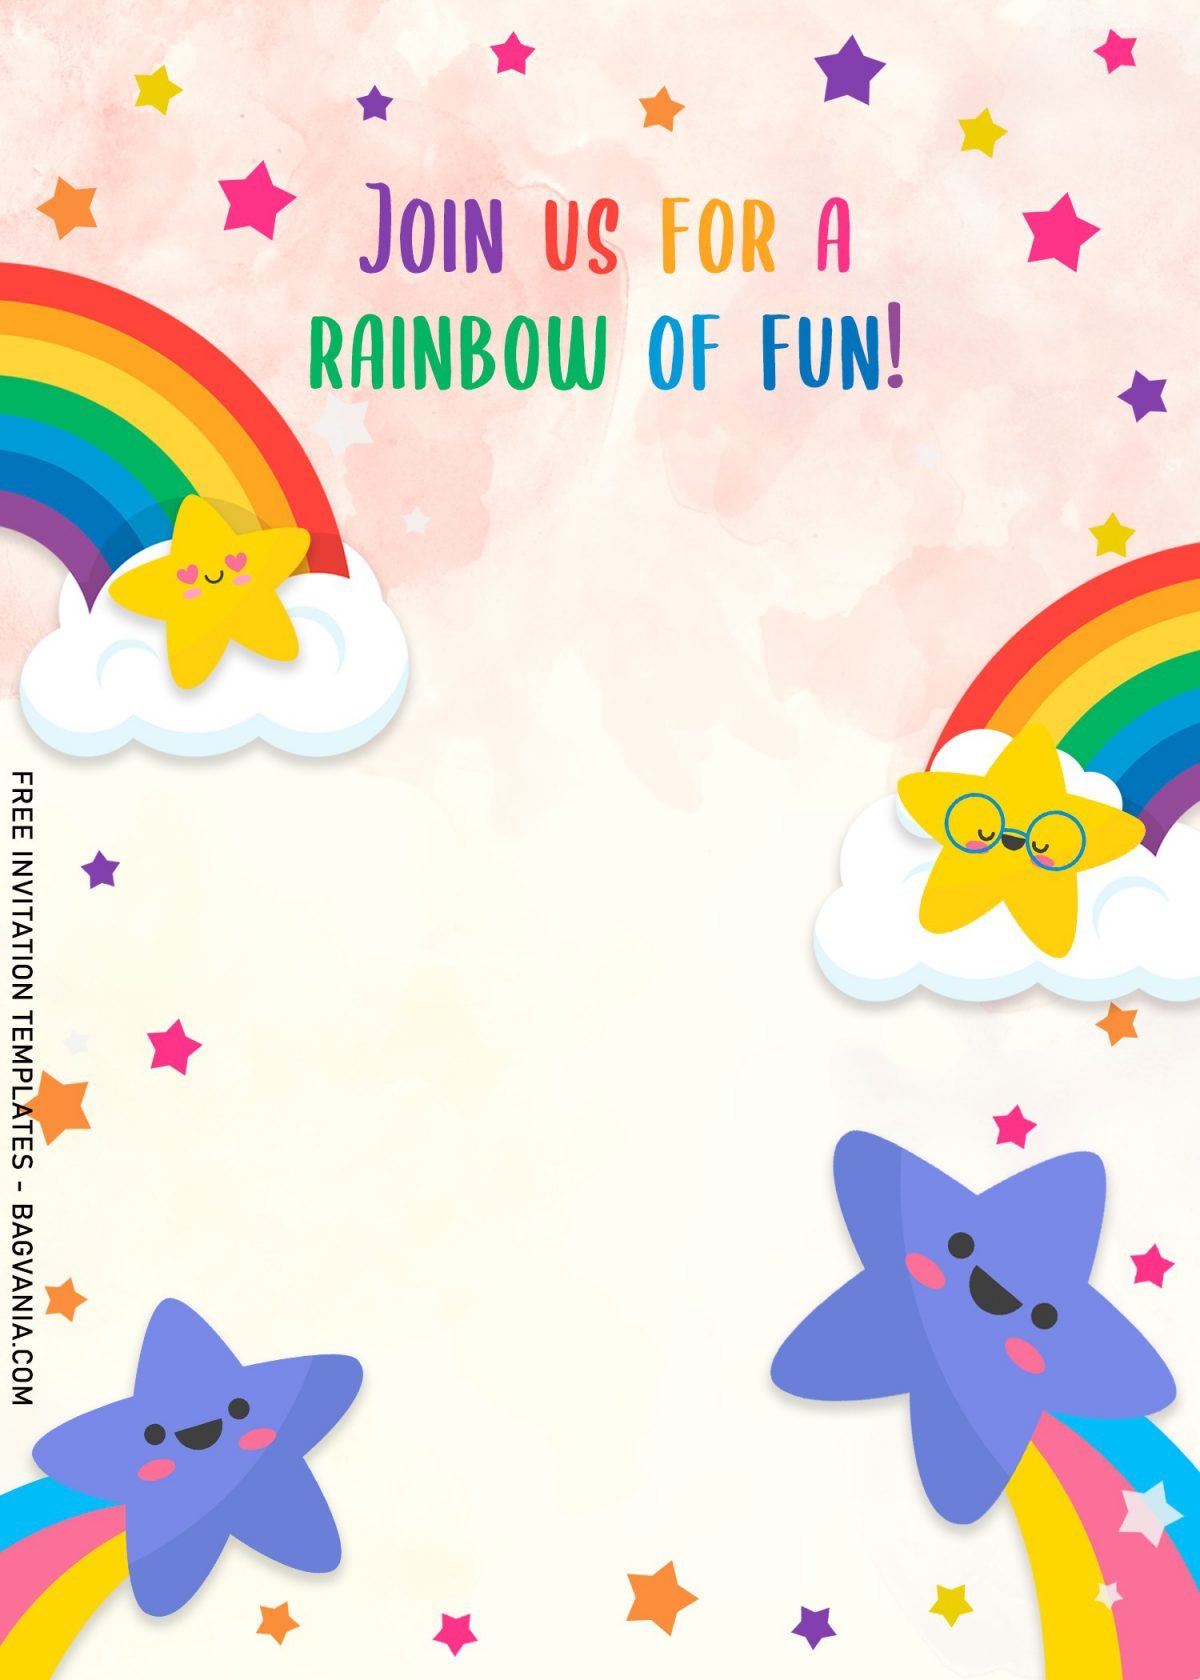 9+ Colorful Rainbow Invitation Card Templates For A Whimsical Birthday Party and has cute yellow star wear eyeglasses